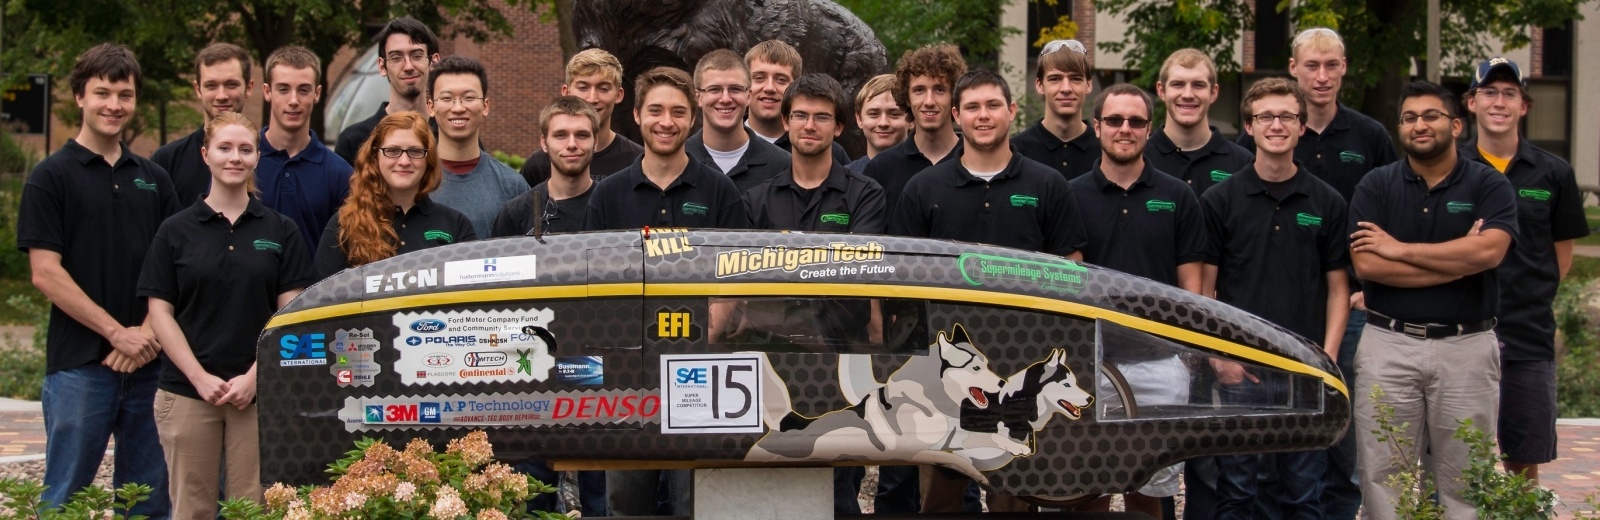 Supermileage Systems Enterprise team pose with their vehicle